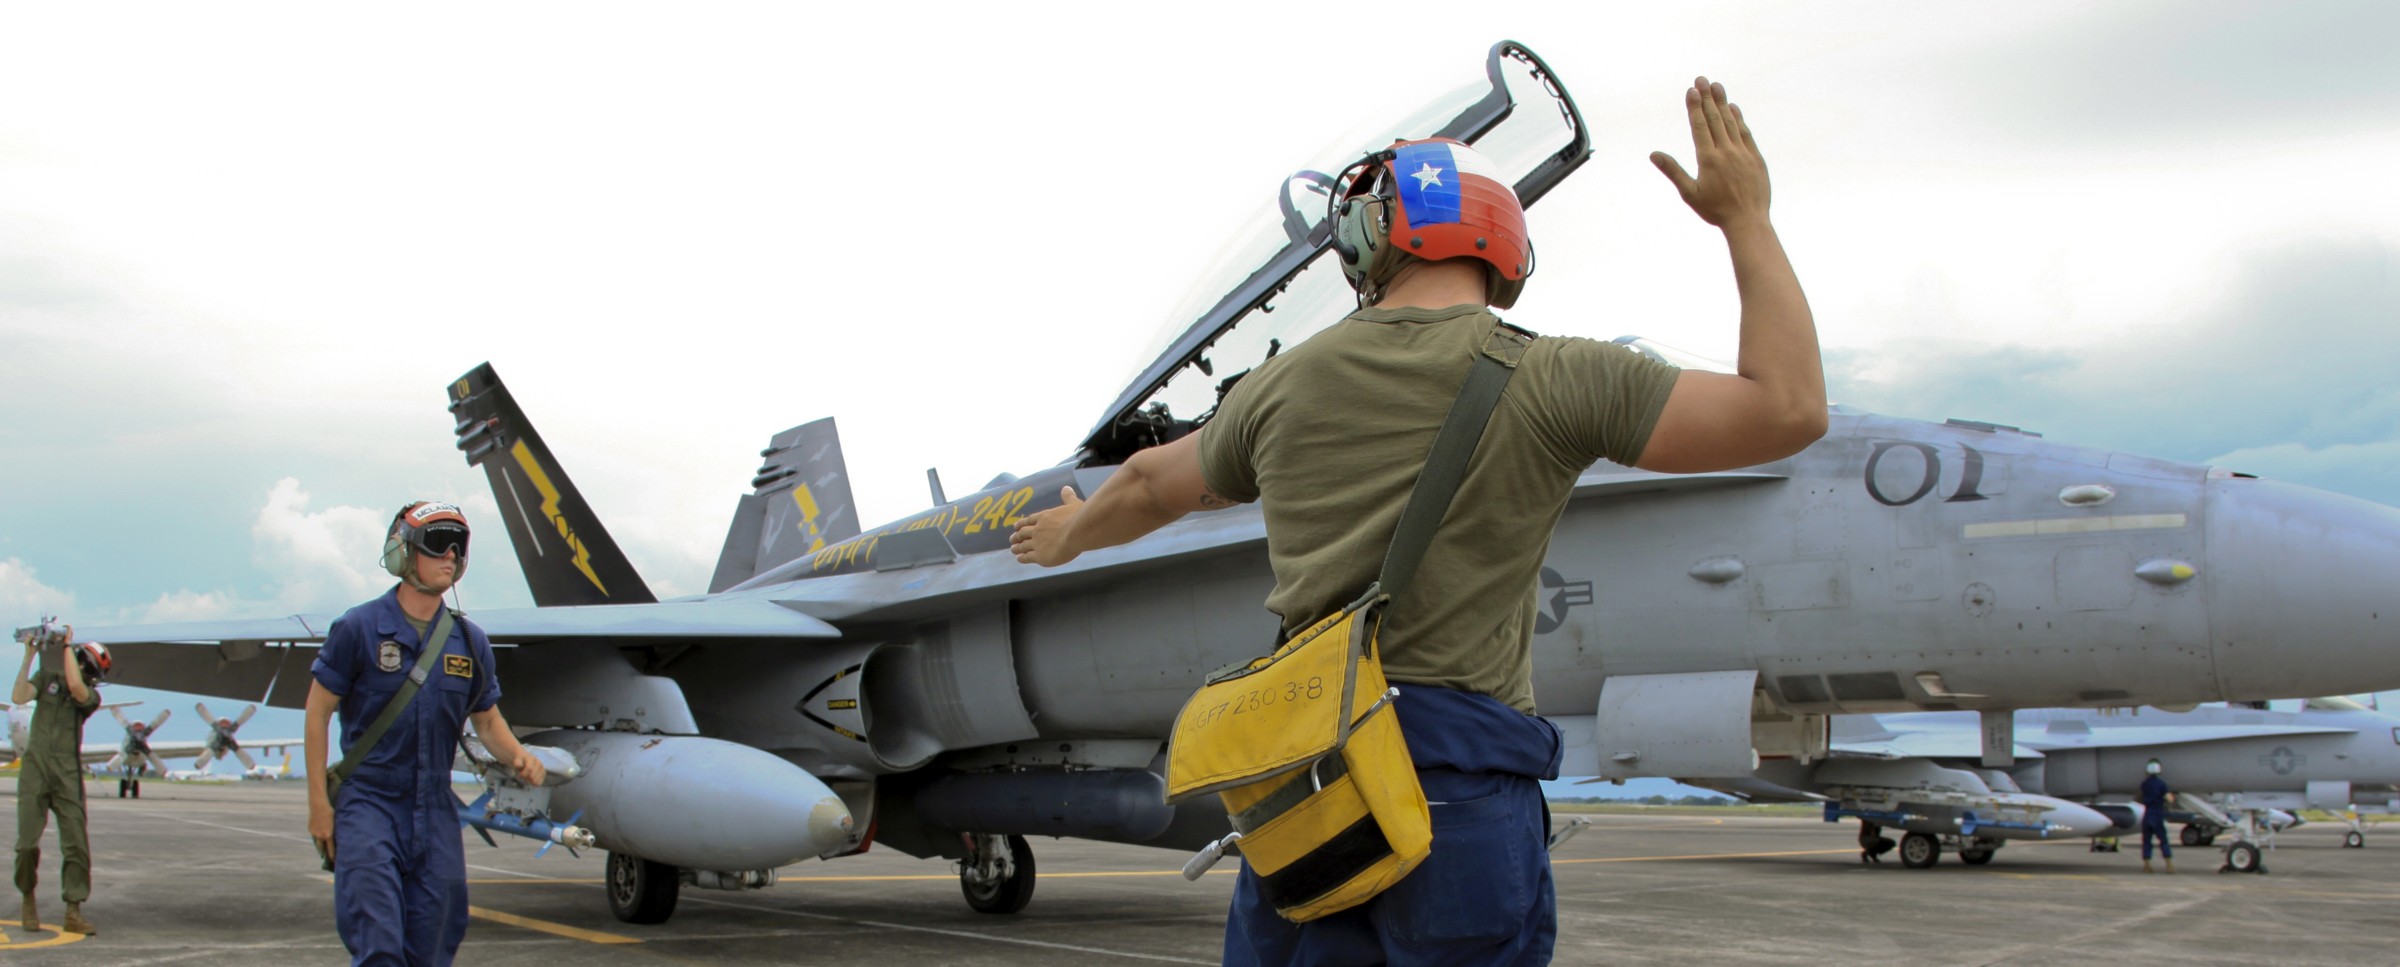 vmfa(aw)-242 bats marine all-weather fighter attack squadron usmc f/a-18d hornet 32 clark air base philippines